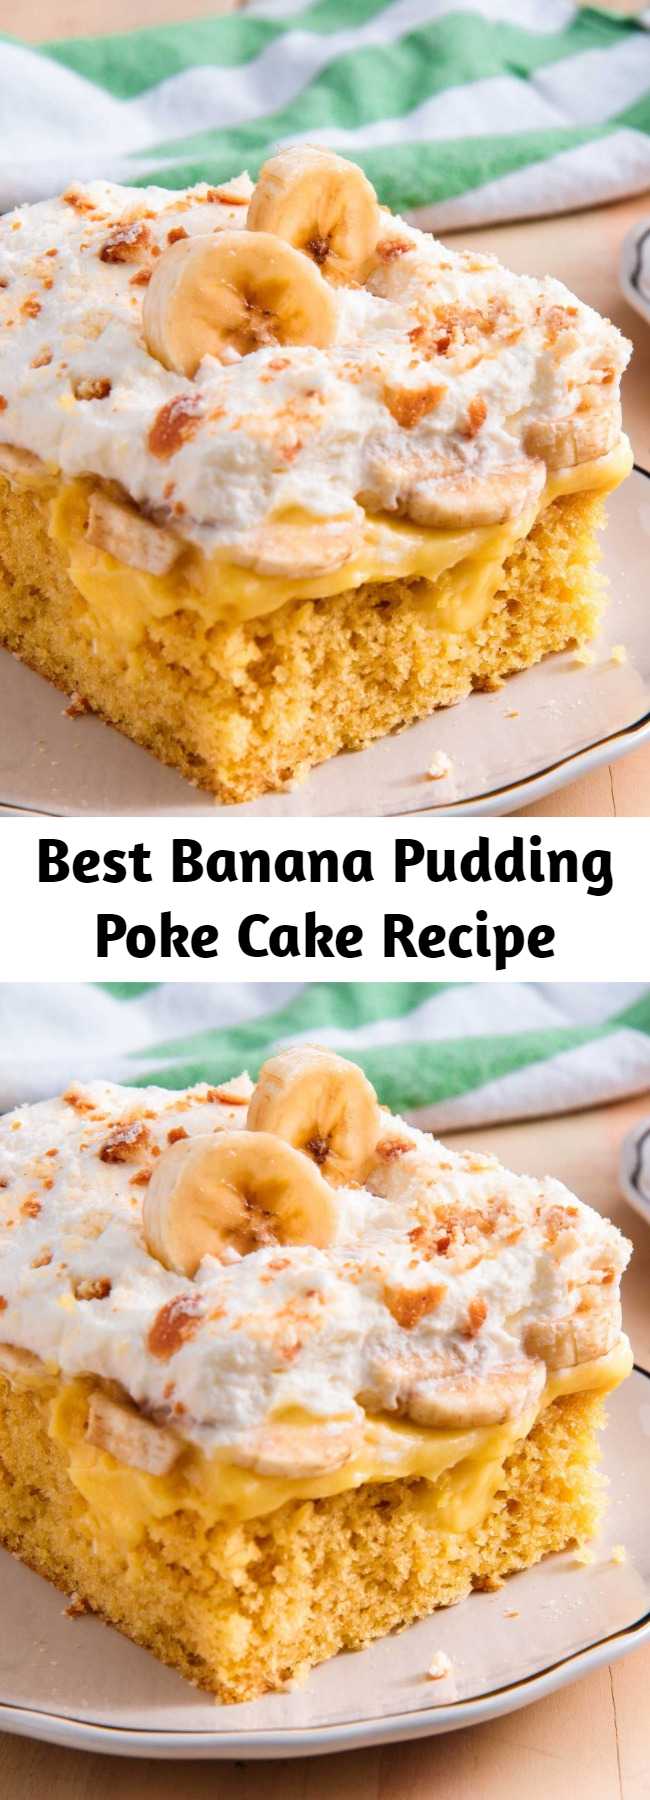 Best Banana Pudding Poke Cake Recipe - This is one of our all-time favorite poke cakes—and we've made lots.